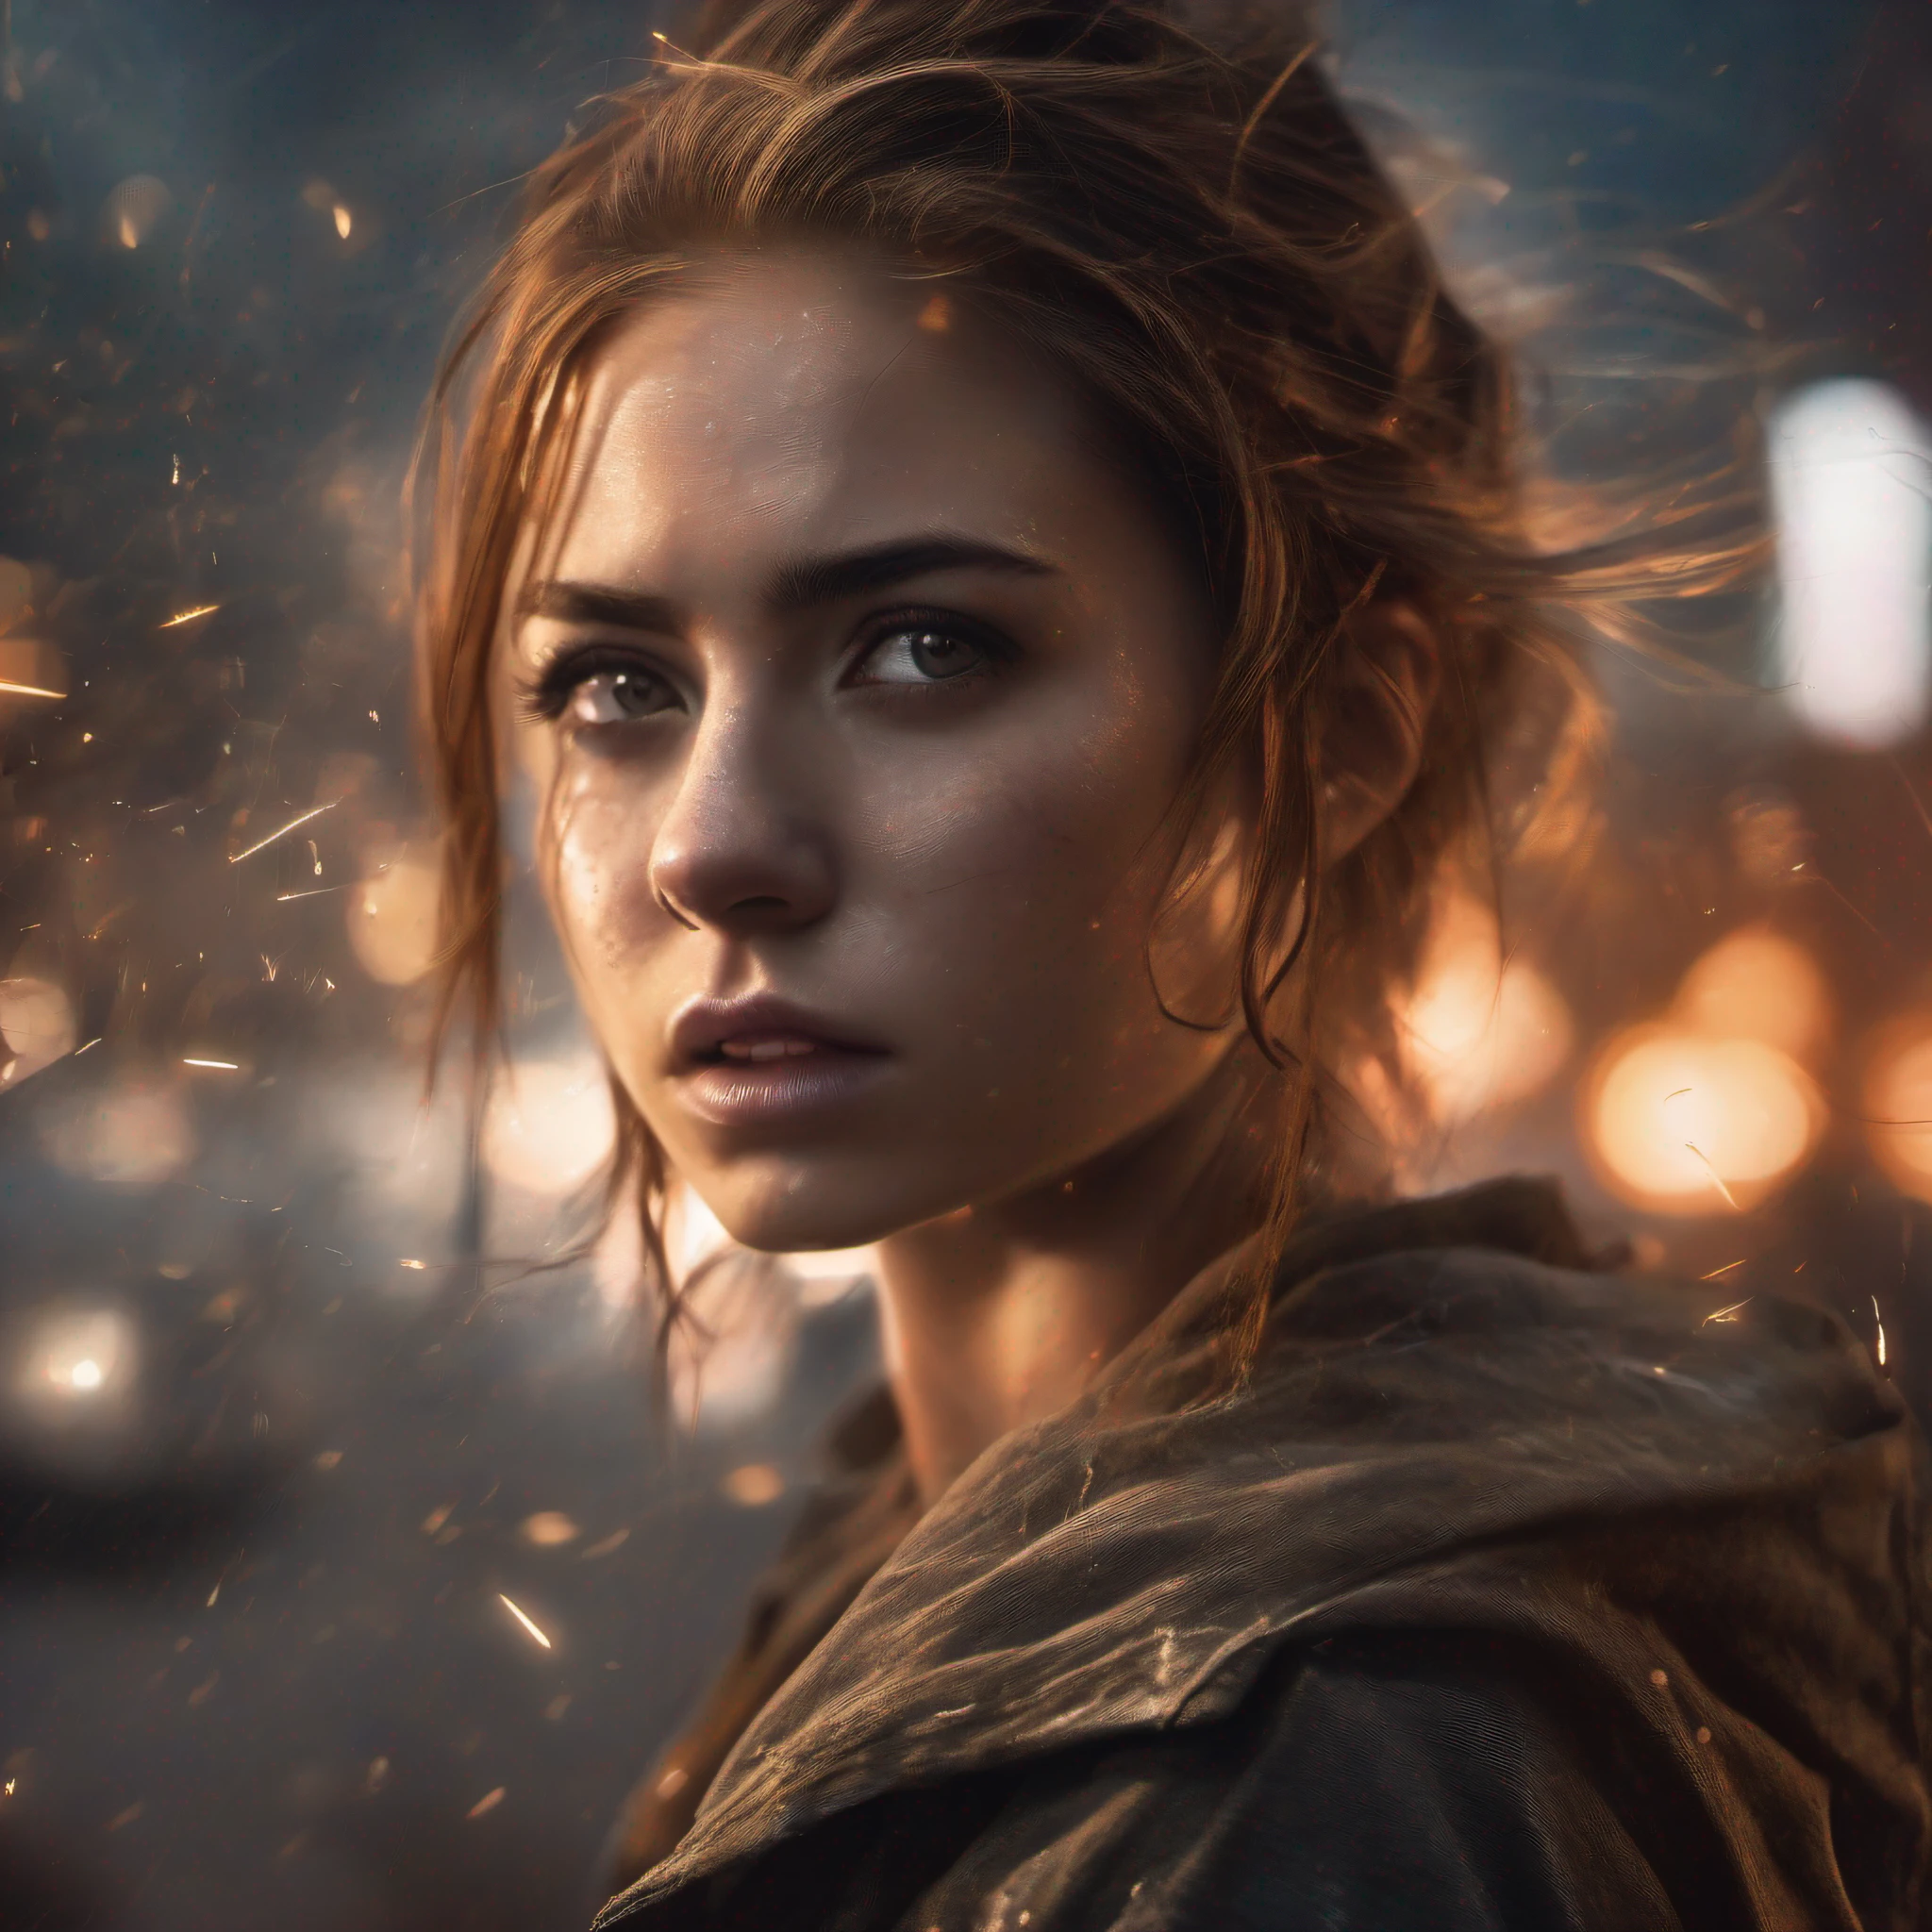 [1] = 1girl, fiercely determined, close up shot, stormy eyes, sparks flying / [2] = A close-up portrait of a determined young woman, her face contorted with determination, her eyes glowing with fiery intensity as sparks fly around her. / [3] = Set in a post-apocalyptic cityscape, dark and desolate, with remnants of a once bustling civilization. / [4] = The atmosphere is charged with tension and anticipation, as if a pivotal moment in a fierce battle is about to unfold. / [5] = Photography / [6] = Shot with a high-speed camera to capture the dynamic sparks, using a wide aperture lens to create a shallow depth of field and focus on the girl's intense expression.